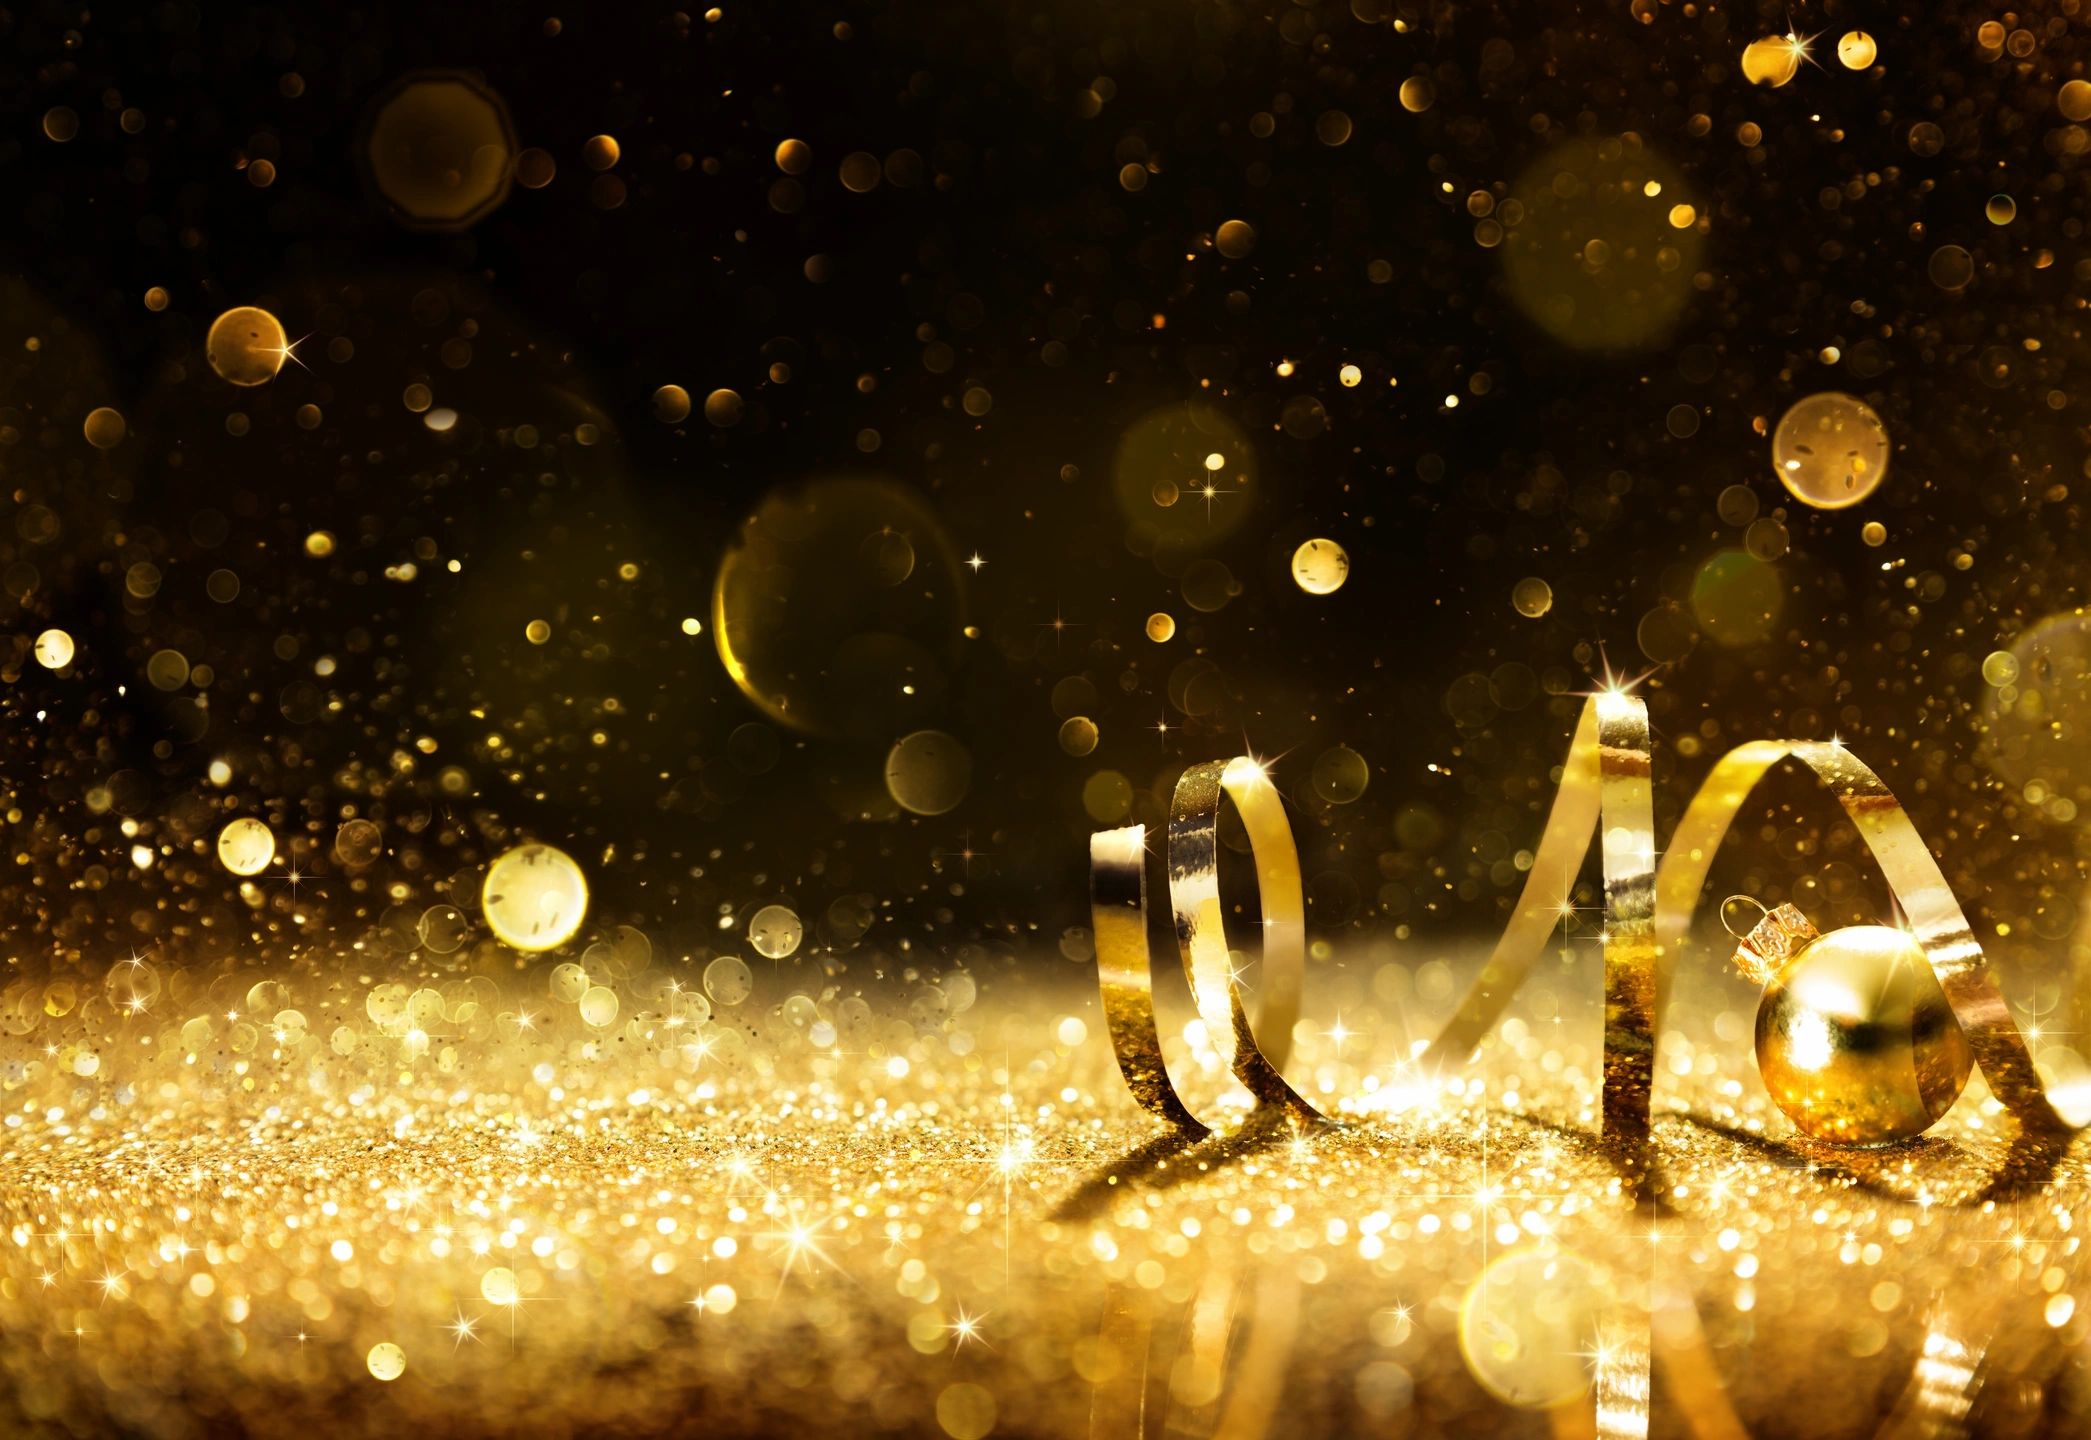 to celebrate the new year, gold confetti and streamers in air against a black background